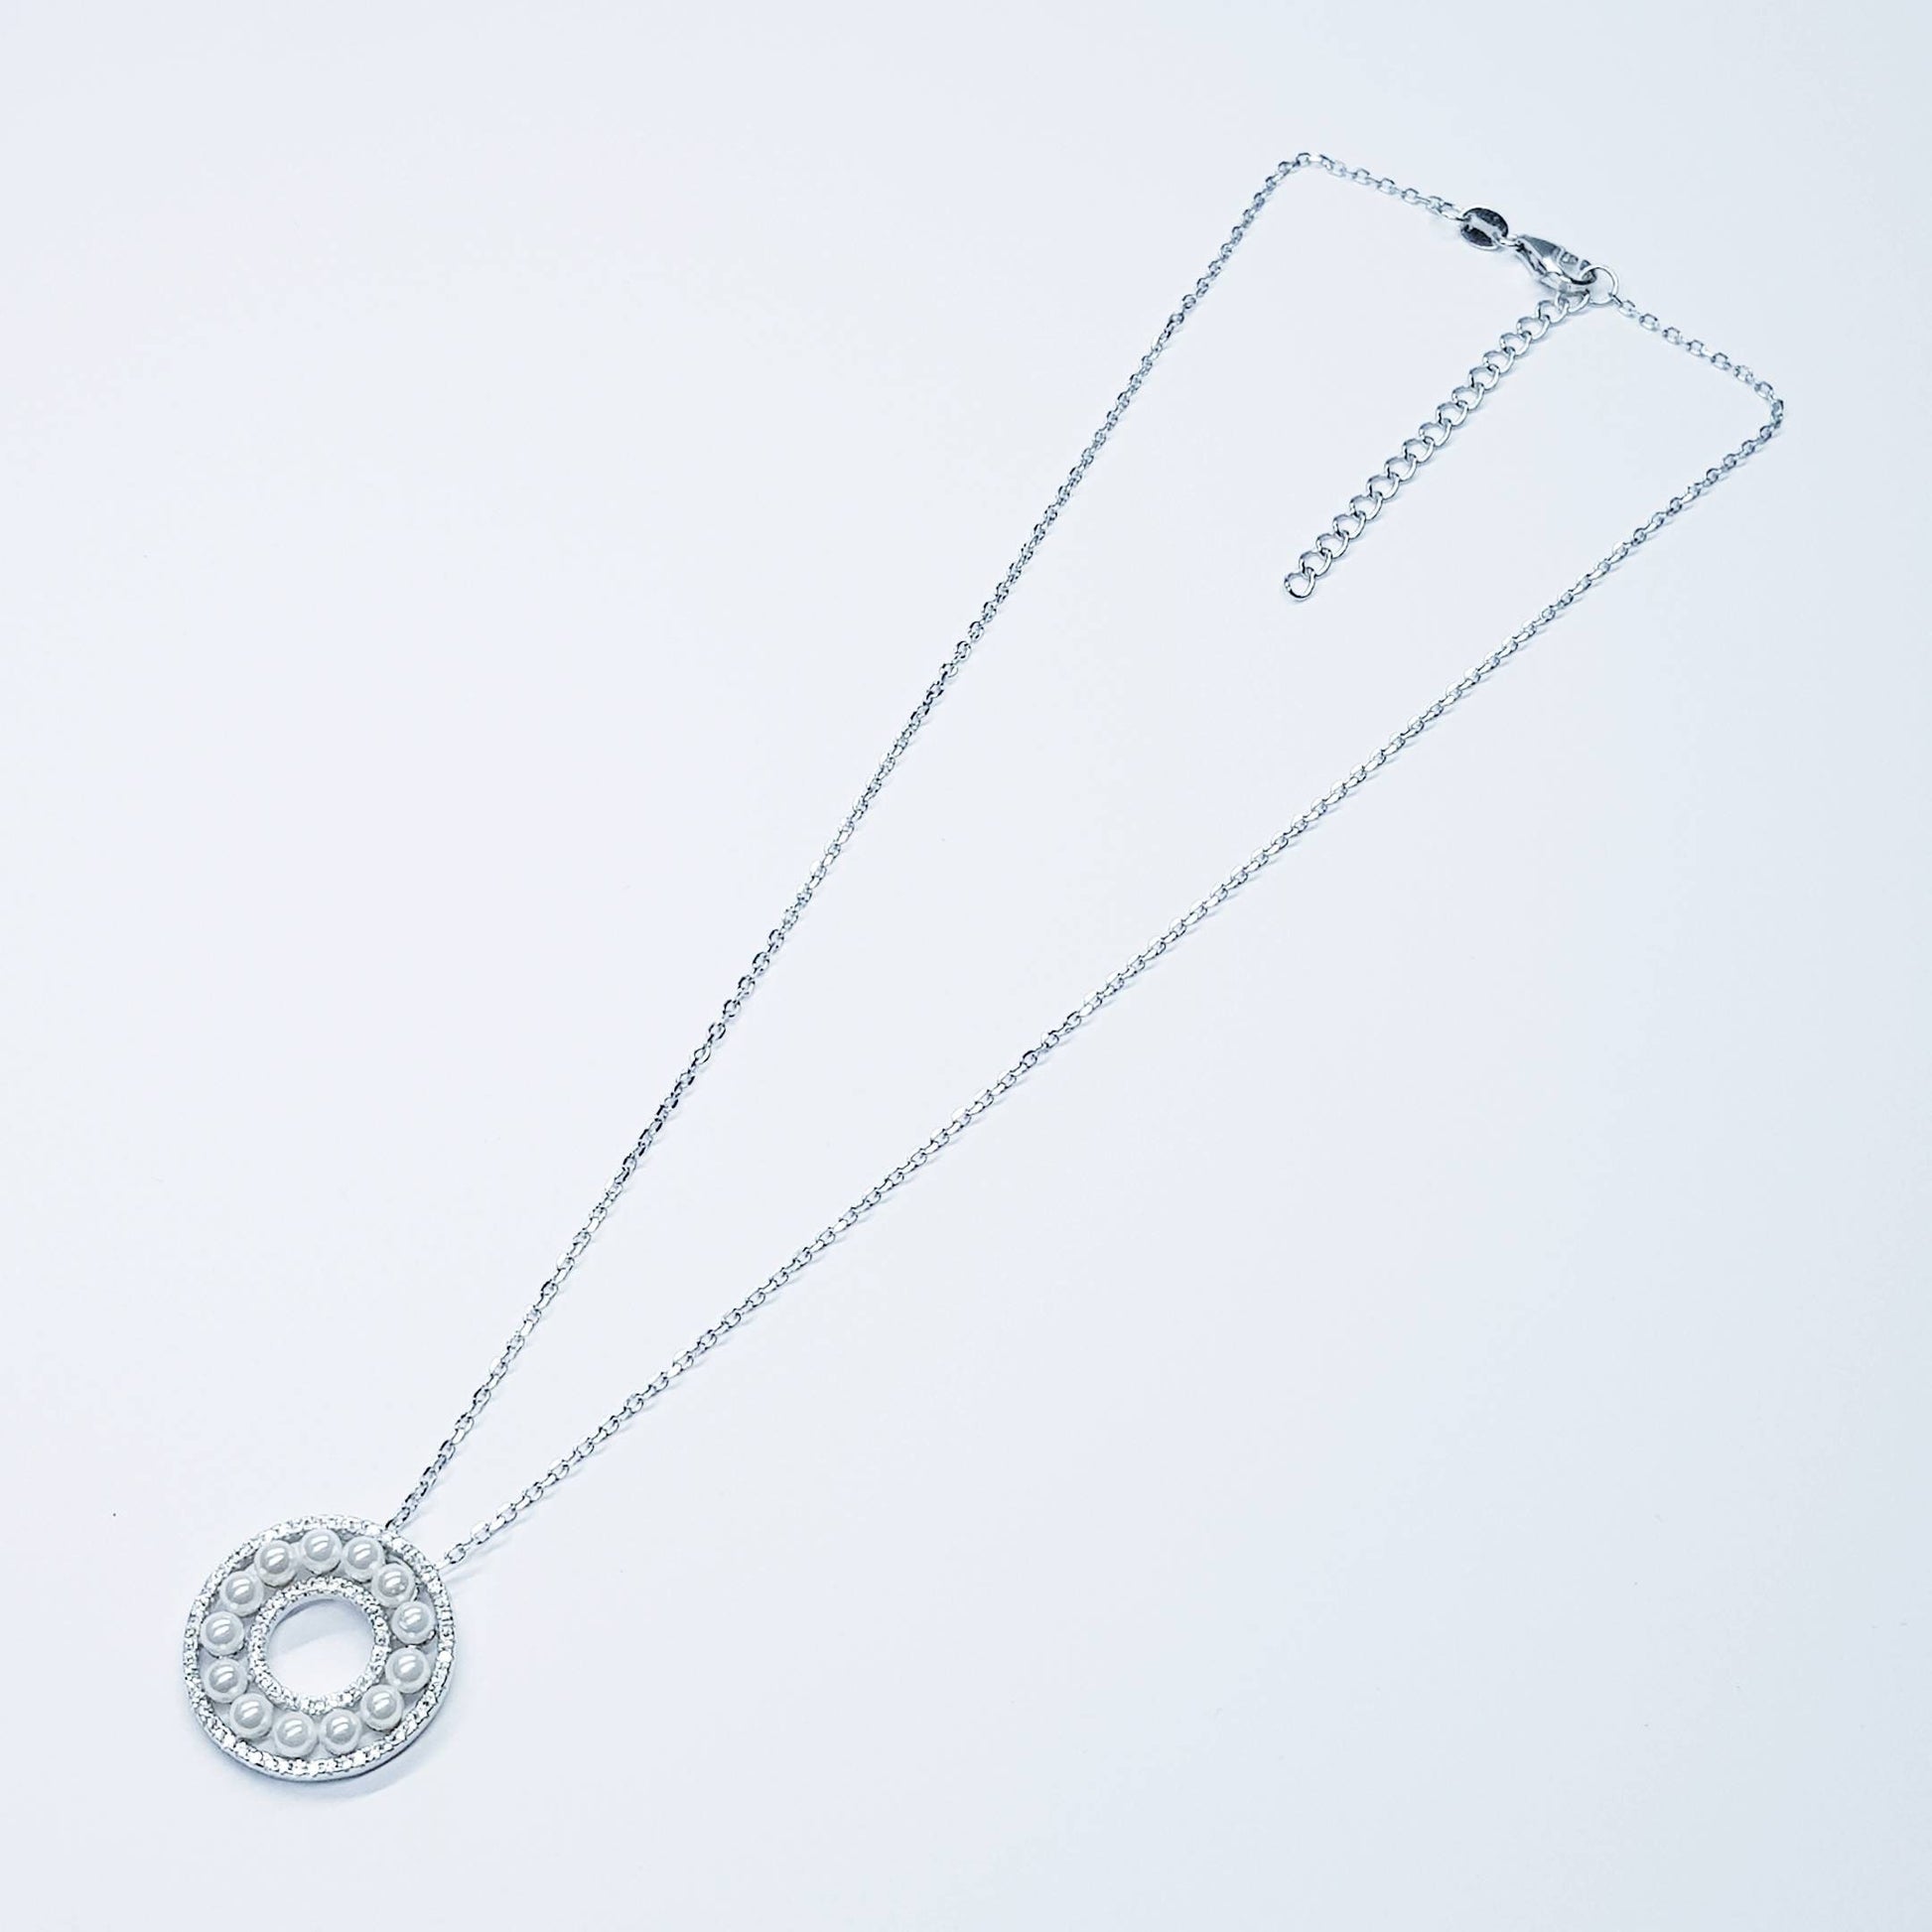 Elegant pearl pendant set in silver with sparkling white cubic zirconia, pearl circle necklace